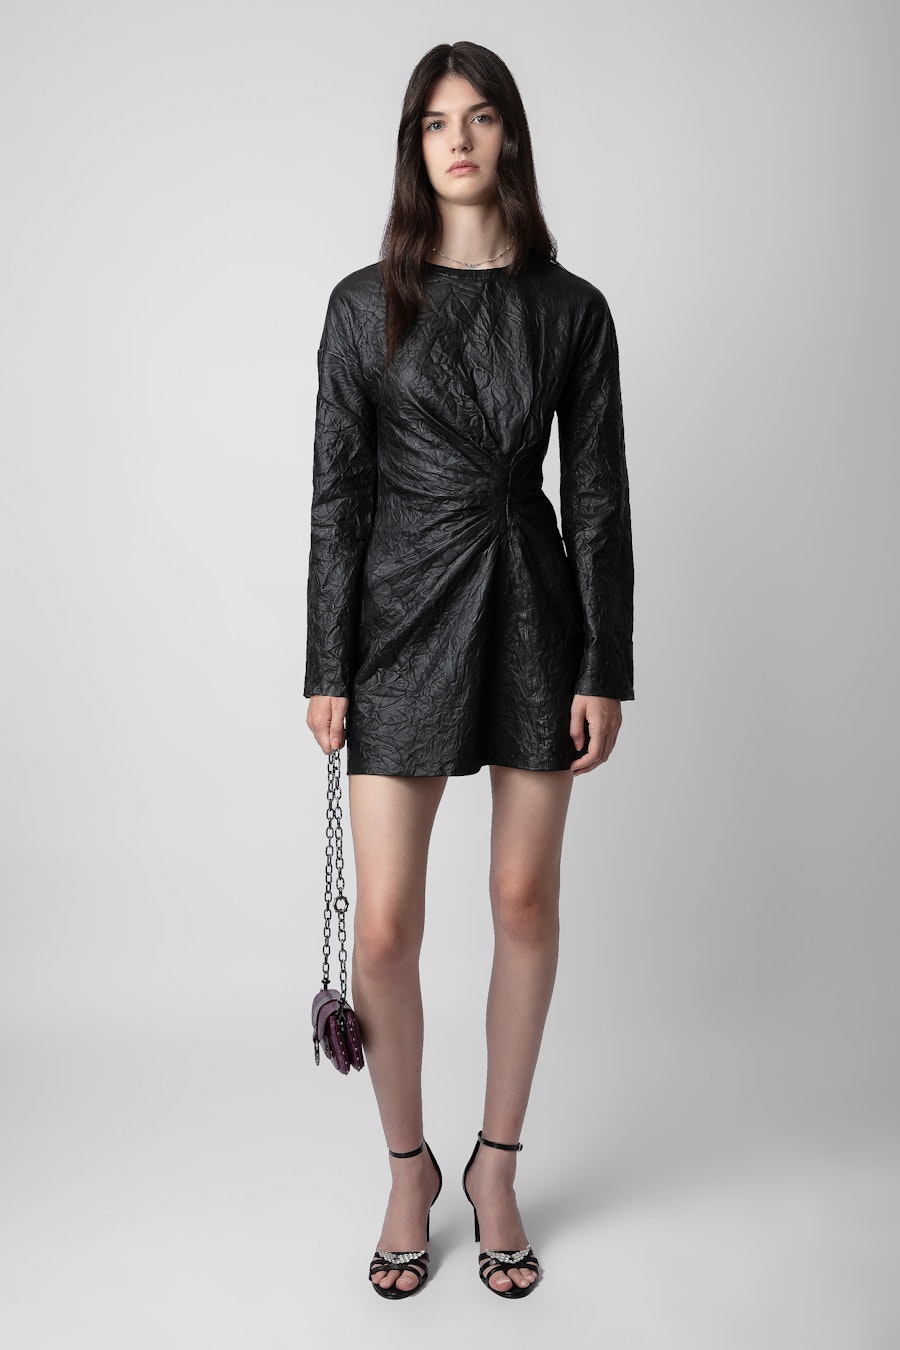 ZADIG&VOLTAIRE Rixina Crinkled Leather Dress,Black